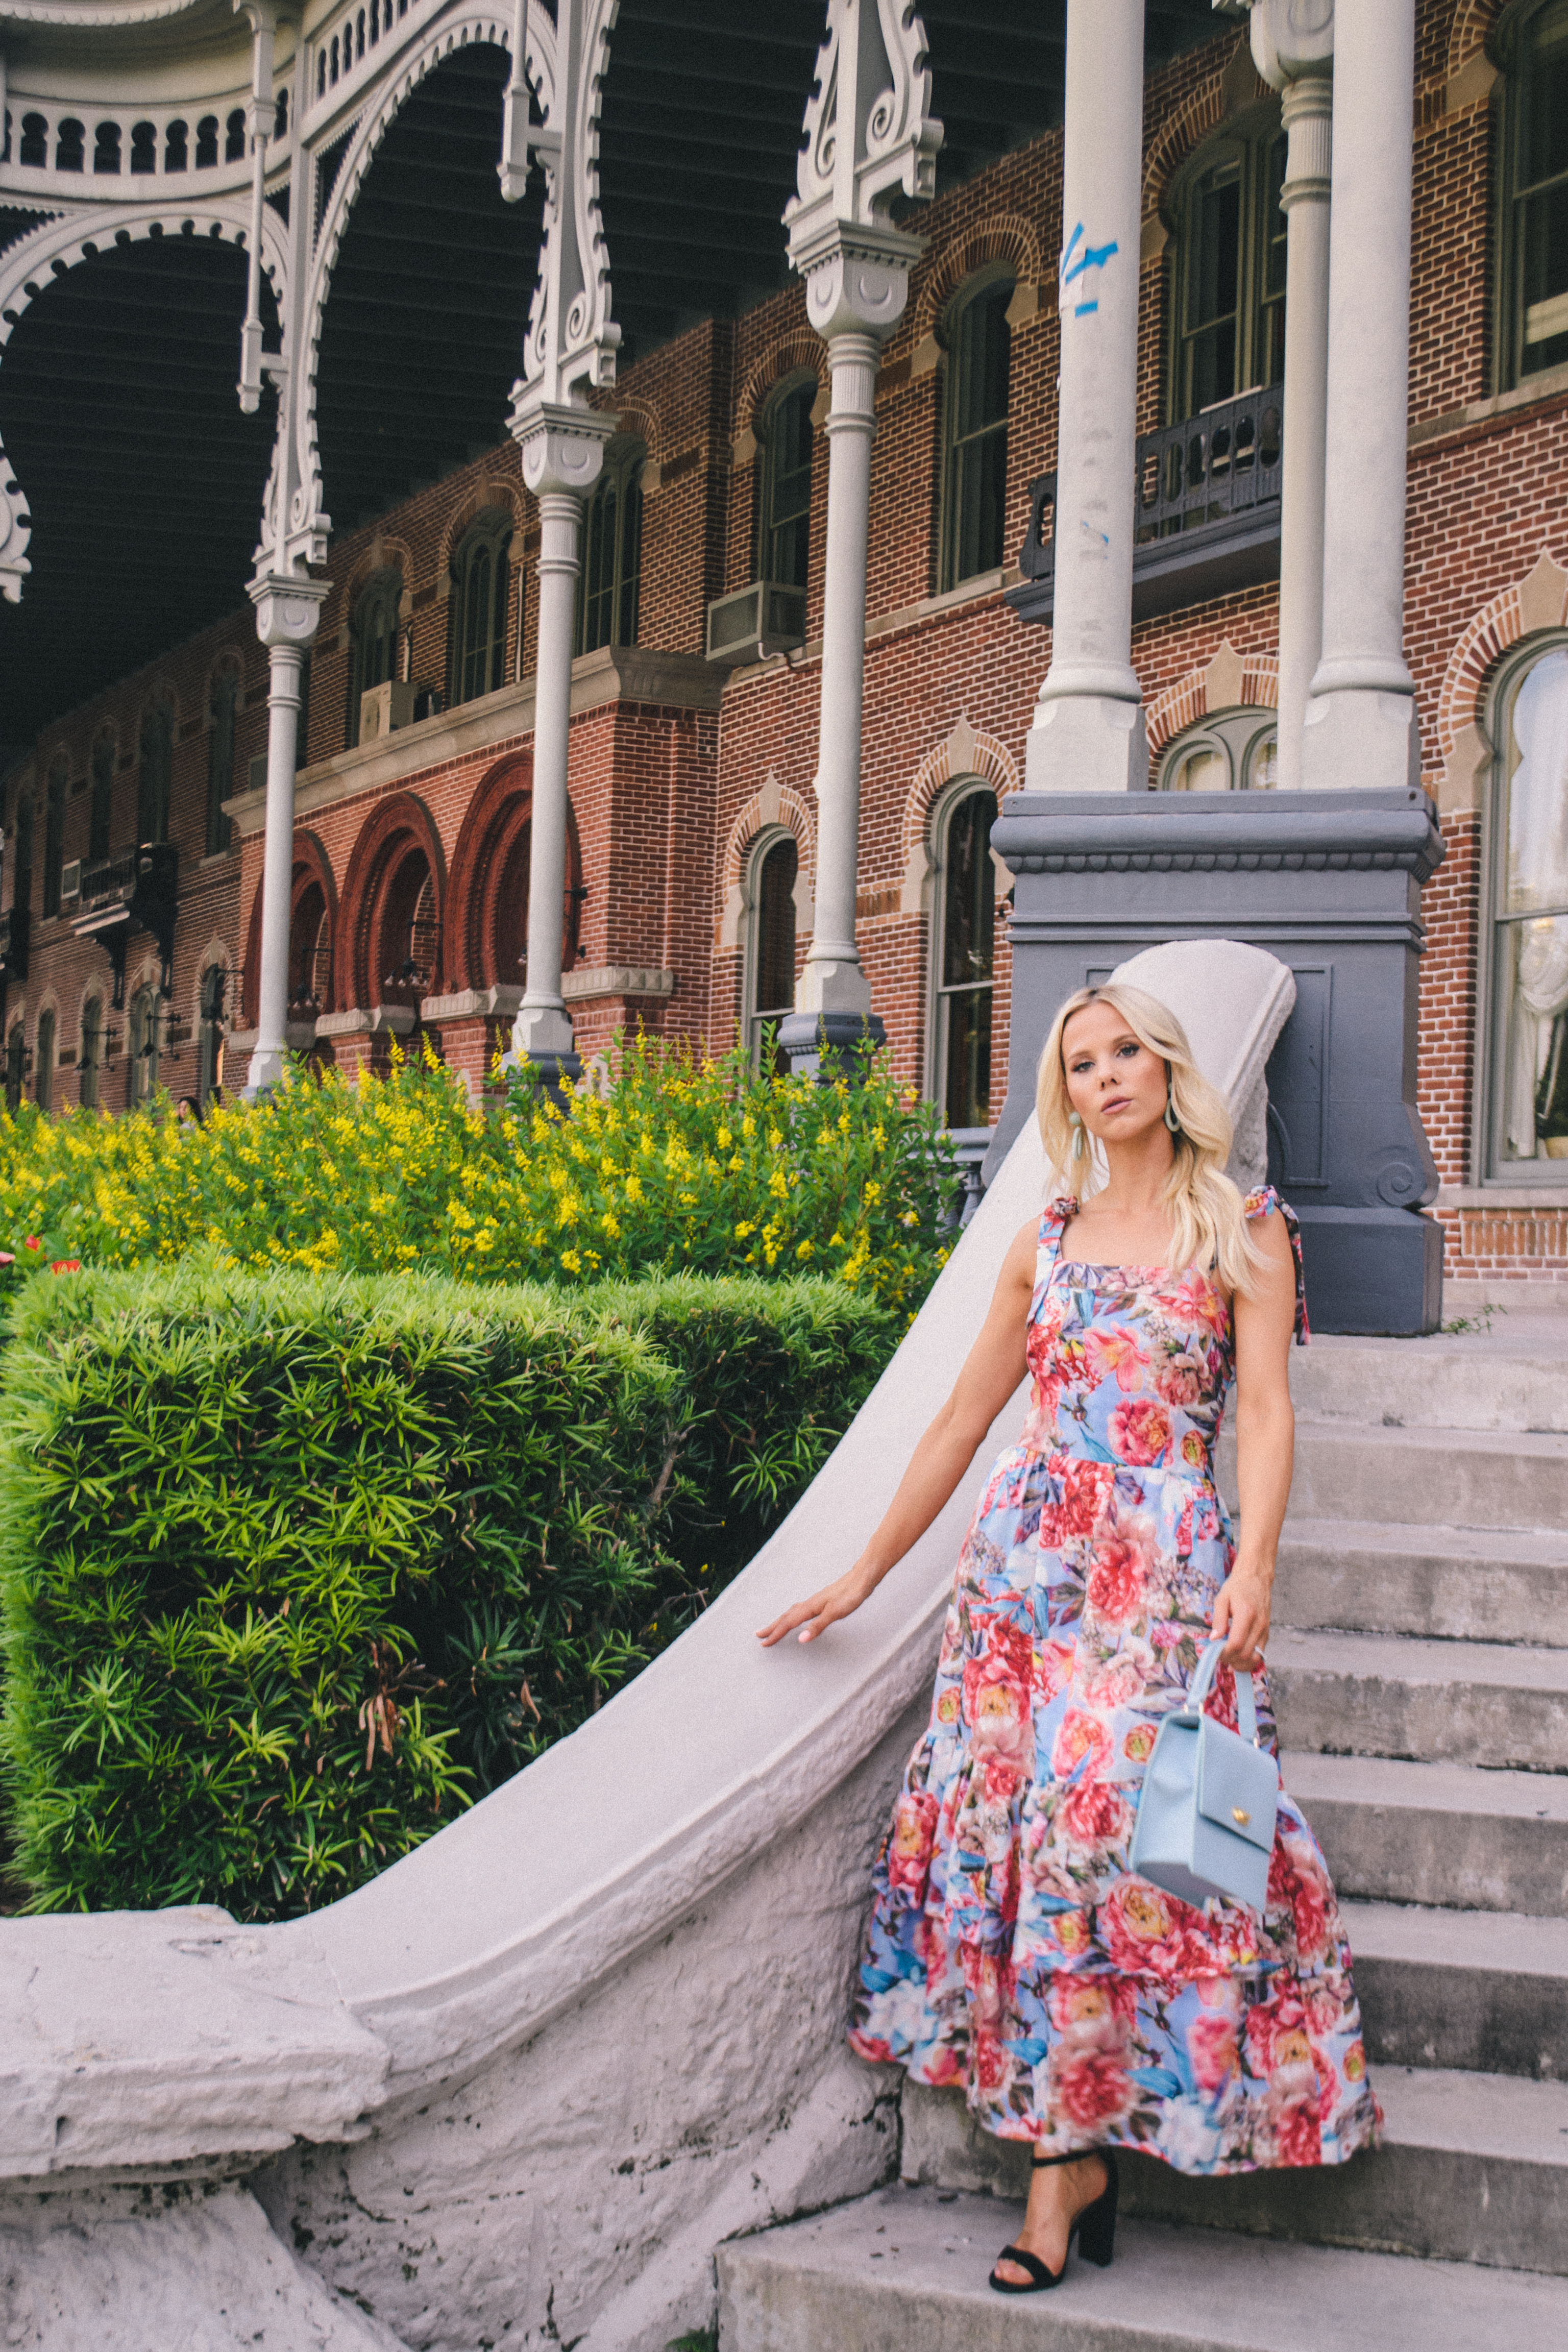 tropical destination vacation style in a floral ruffle hem midi dress by Hannah McDonnell of Glam Life Living #vacationstyle #tropicalstyle #vacationoutfit #floridaoutfit